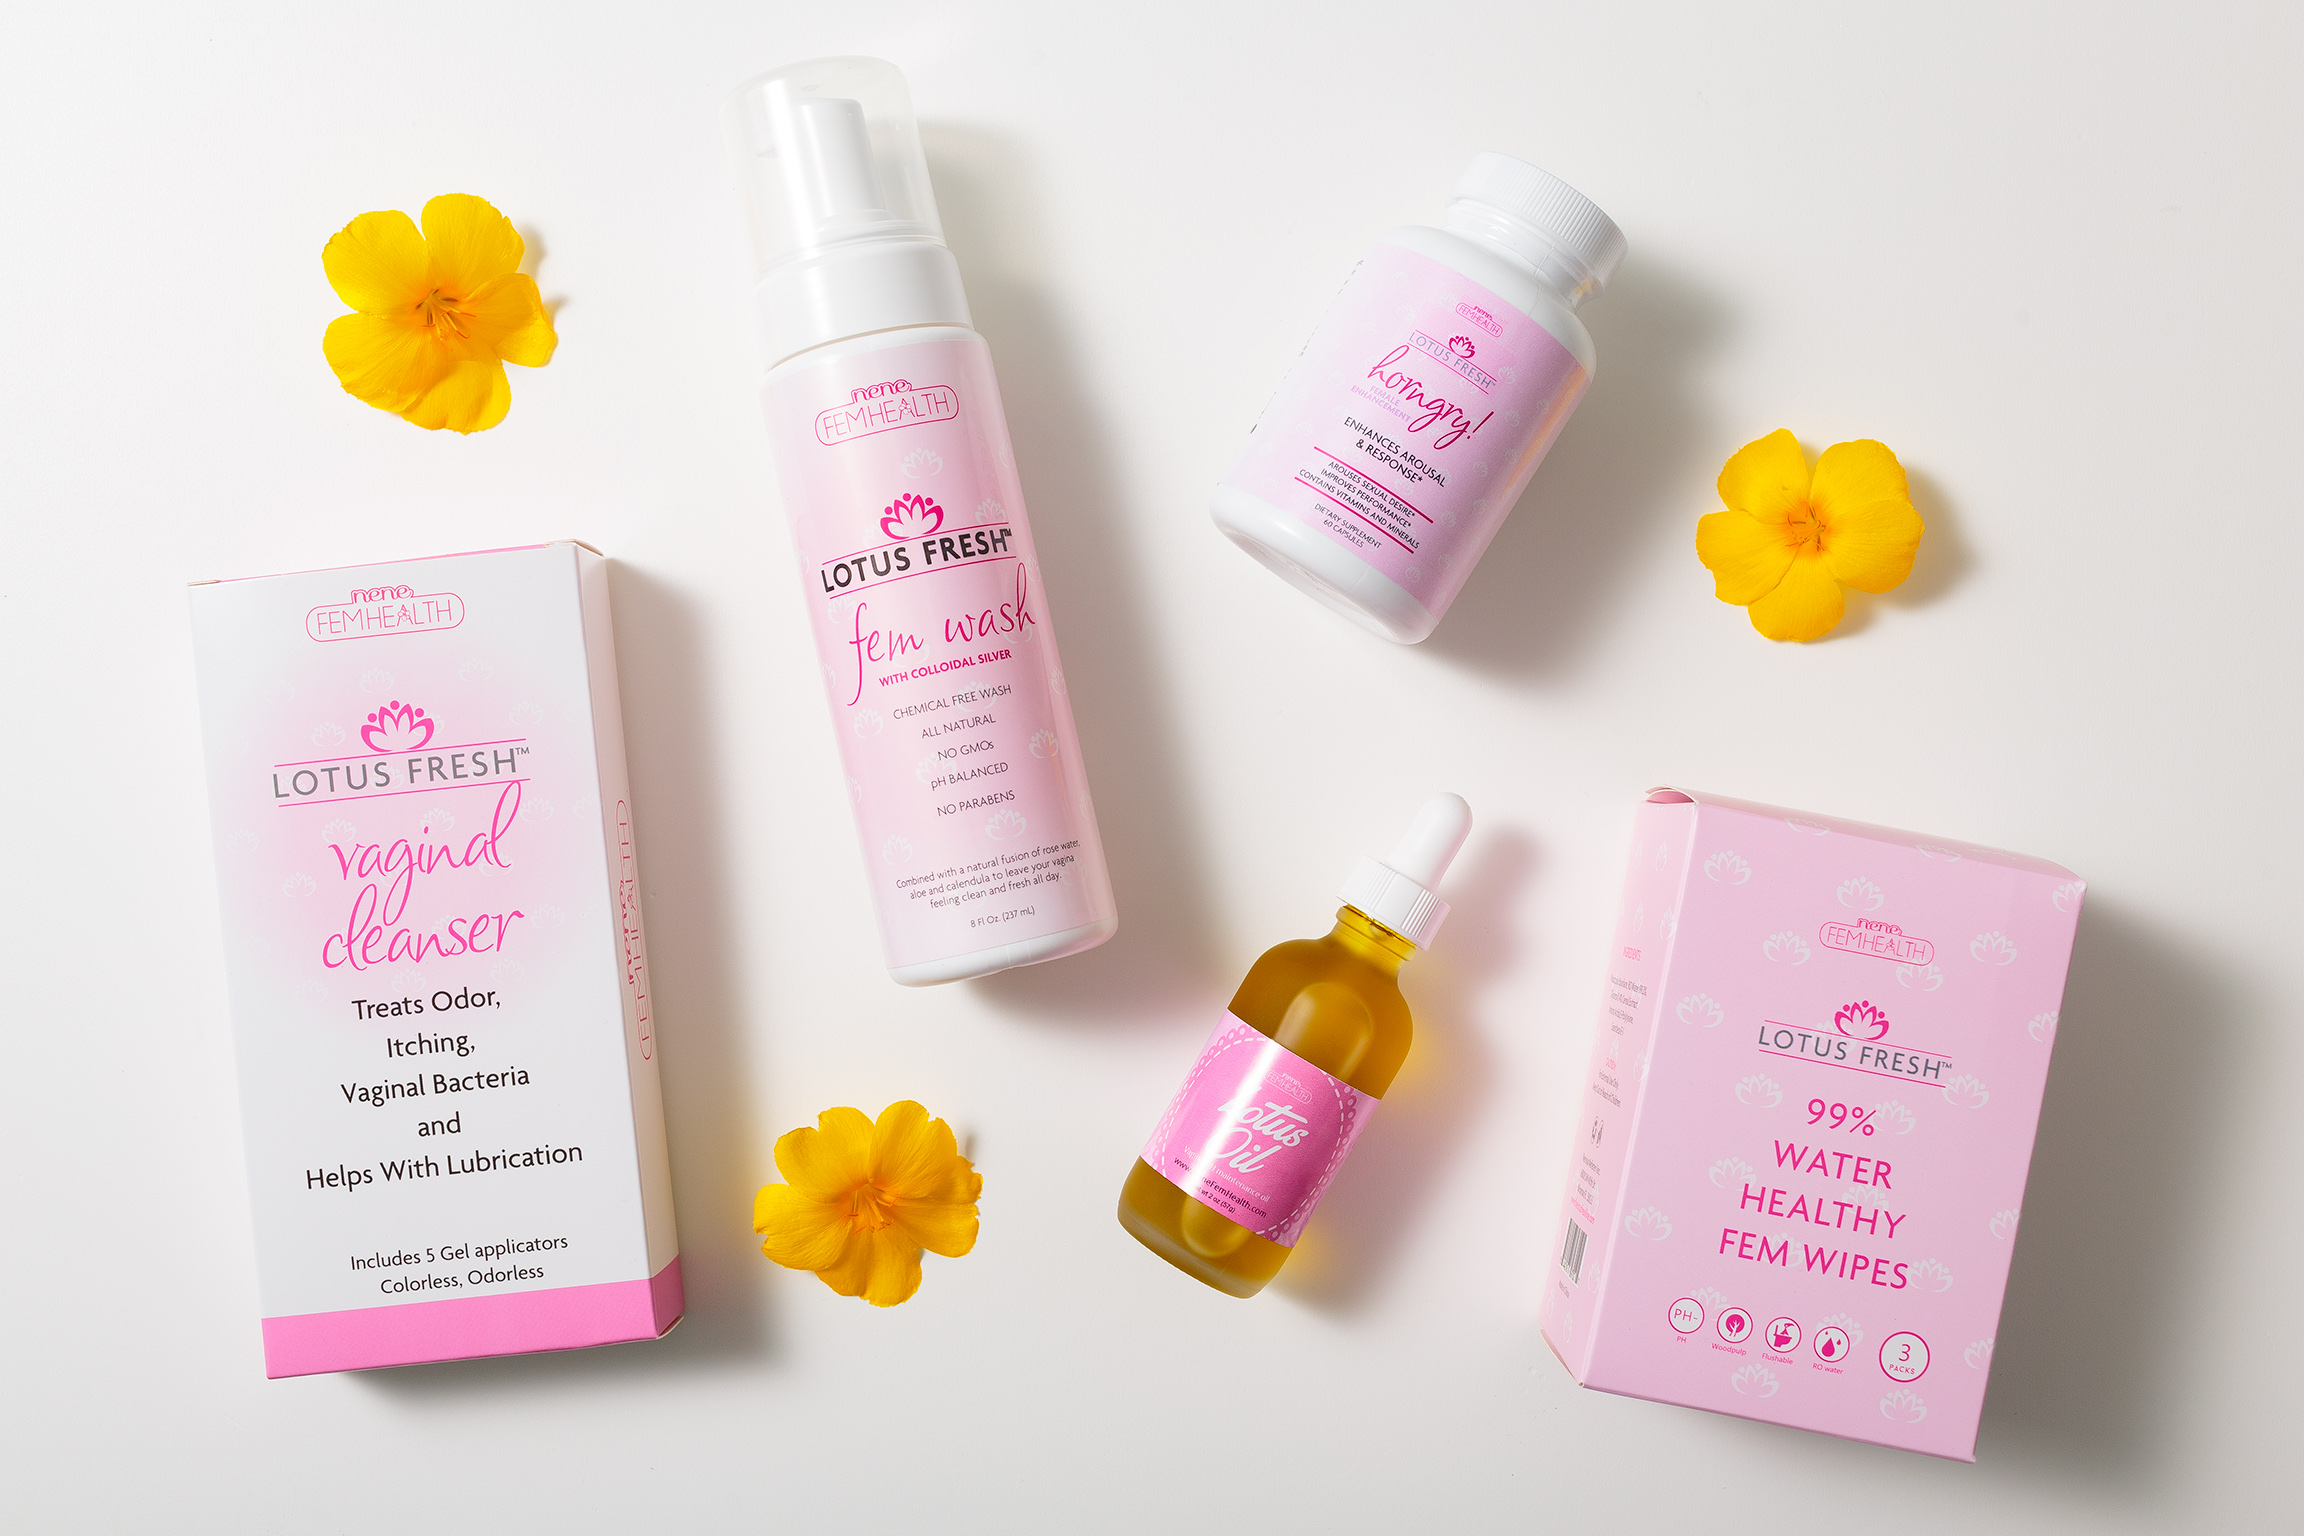 Lotus Fresh Products by Nene FemHealth